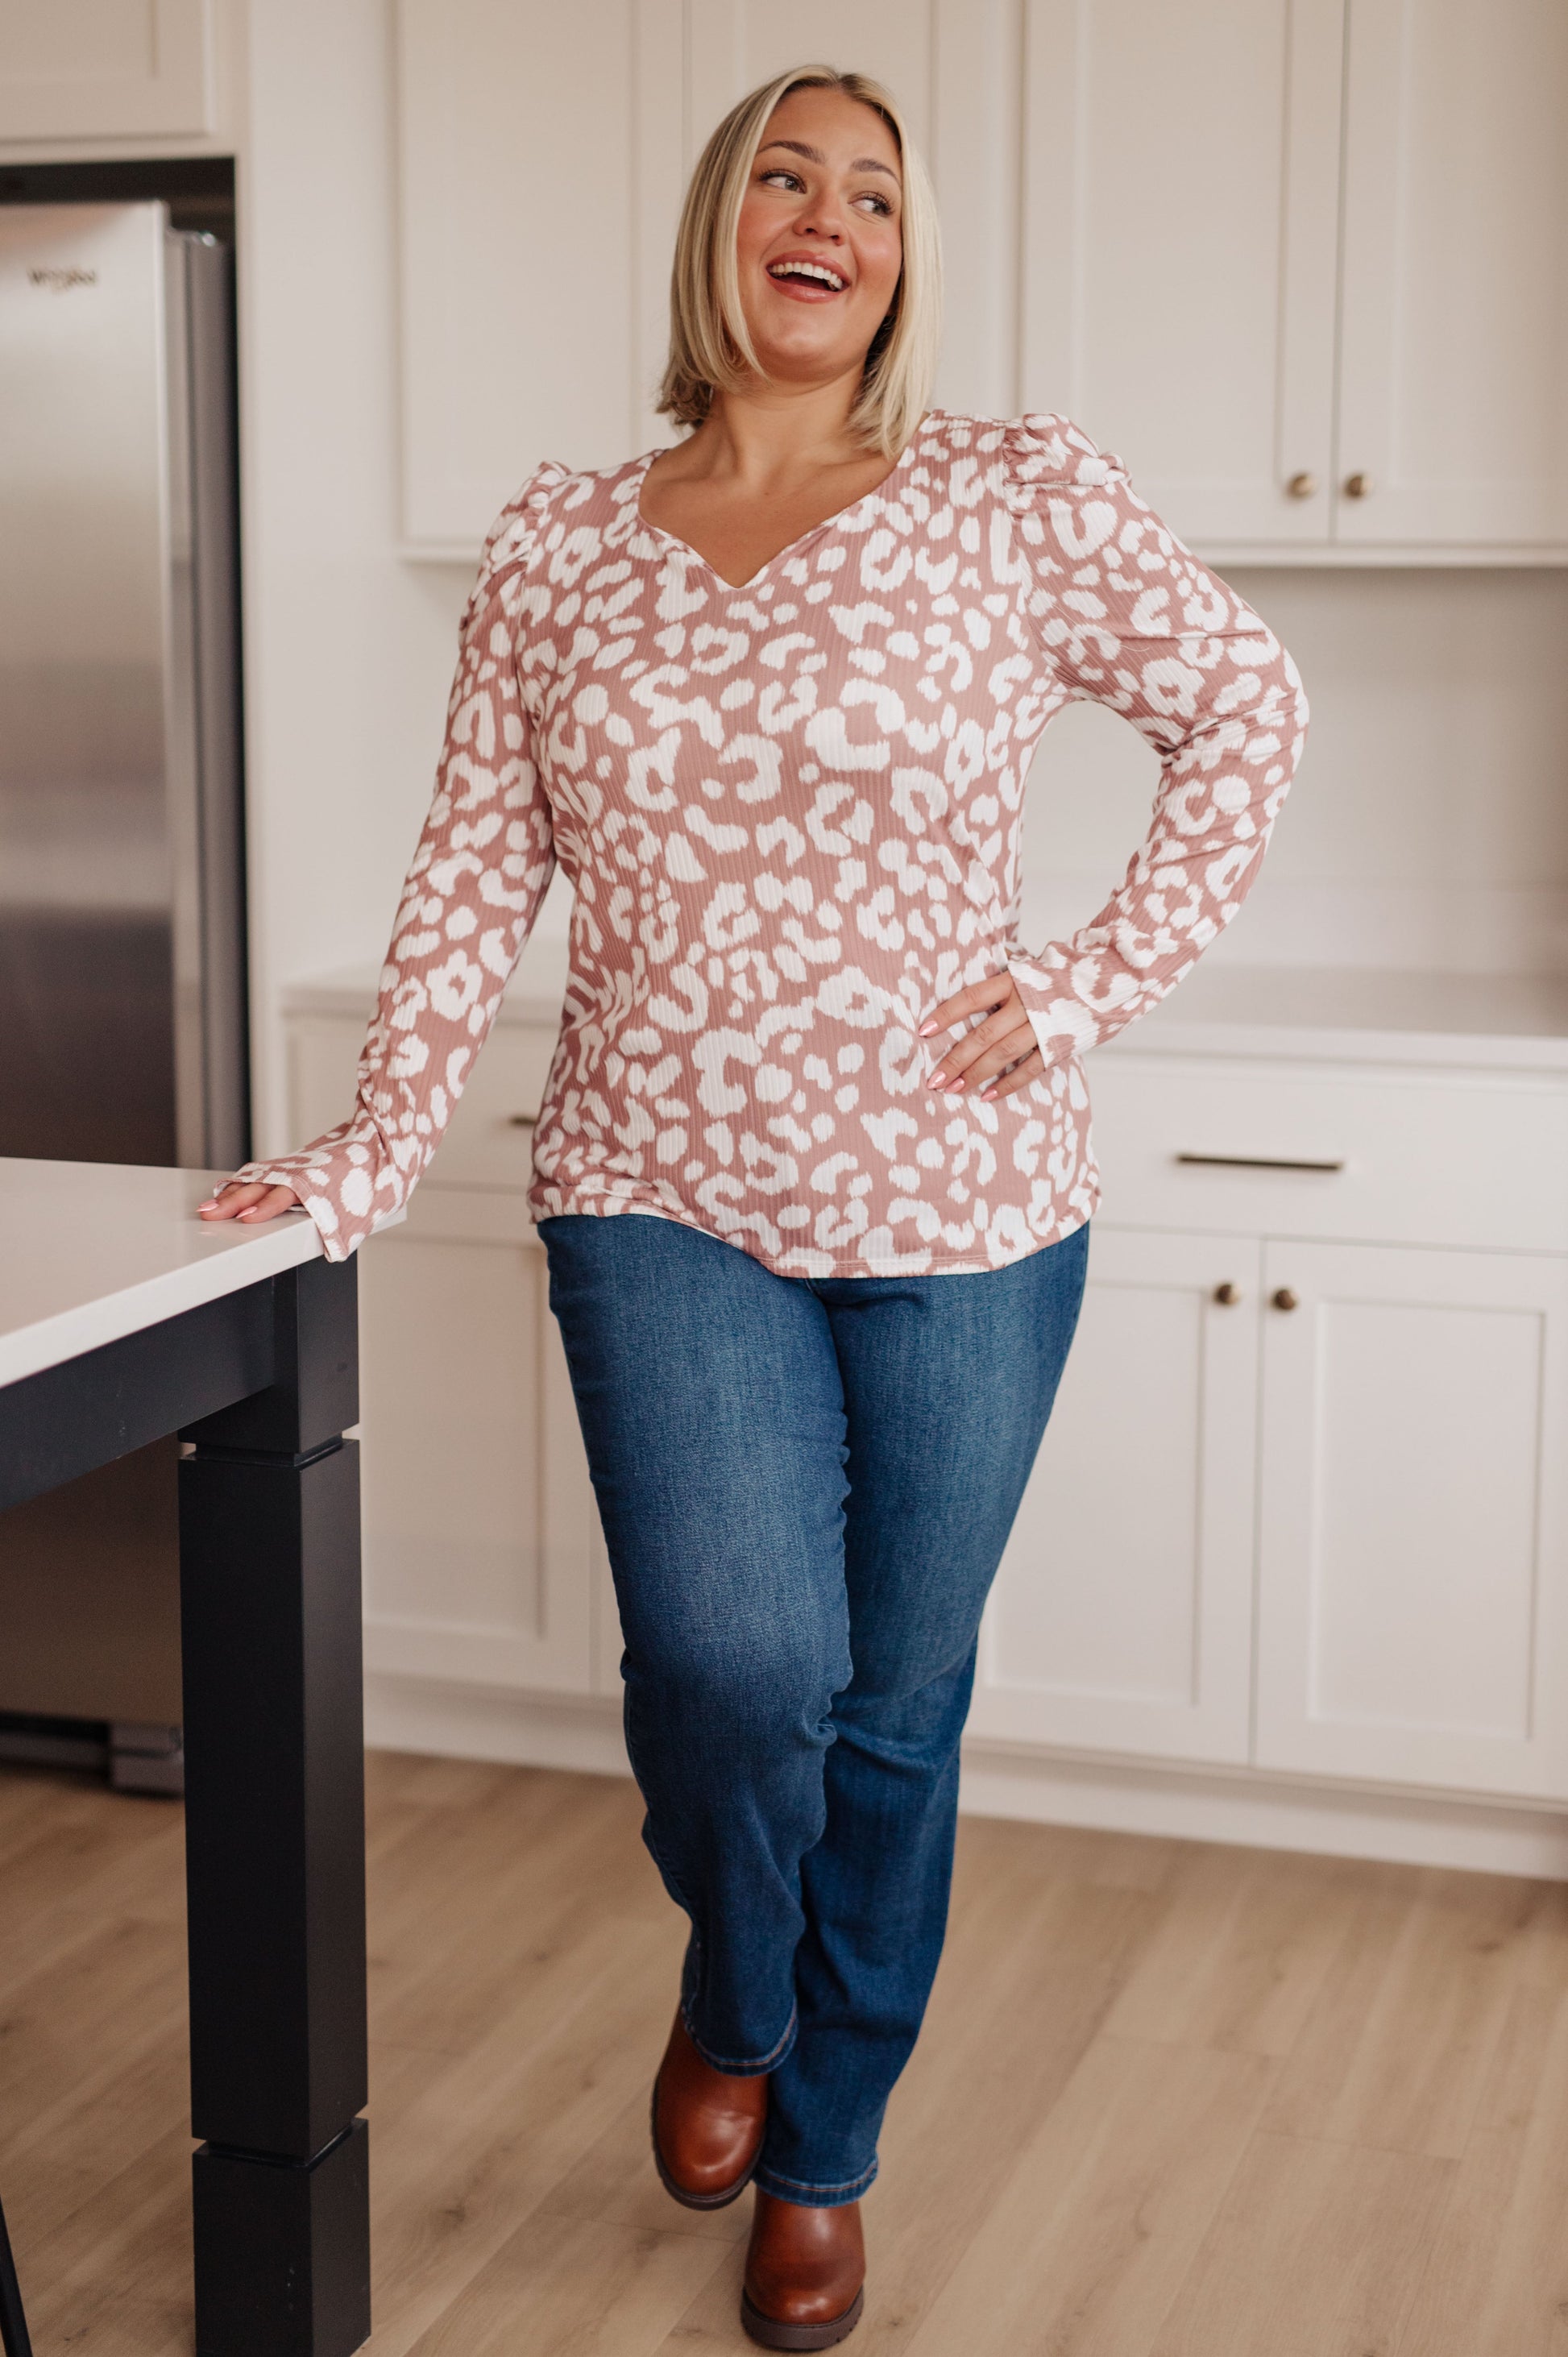 This Wild Weekend Animal Print Top lets you show off your wild side. Crafted from soft ribbed jersey knit, it features a sweetheart neckline and puff sleeves with a standout animal print. Have fun and stand out in this stylish top!